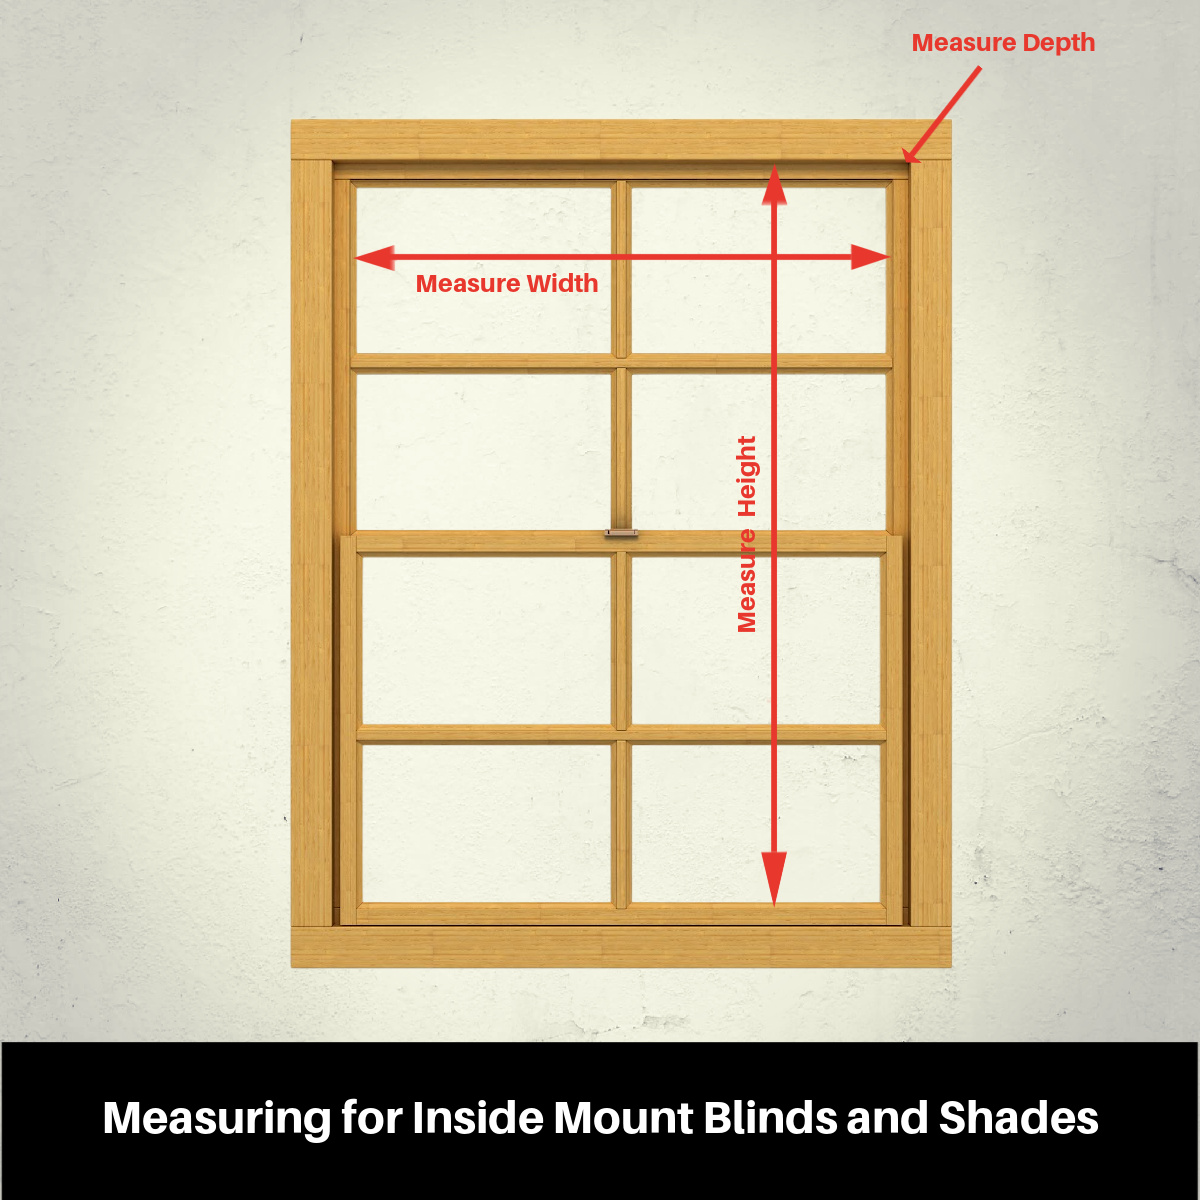 Measuring for Inside Mount Blinds and Shades